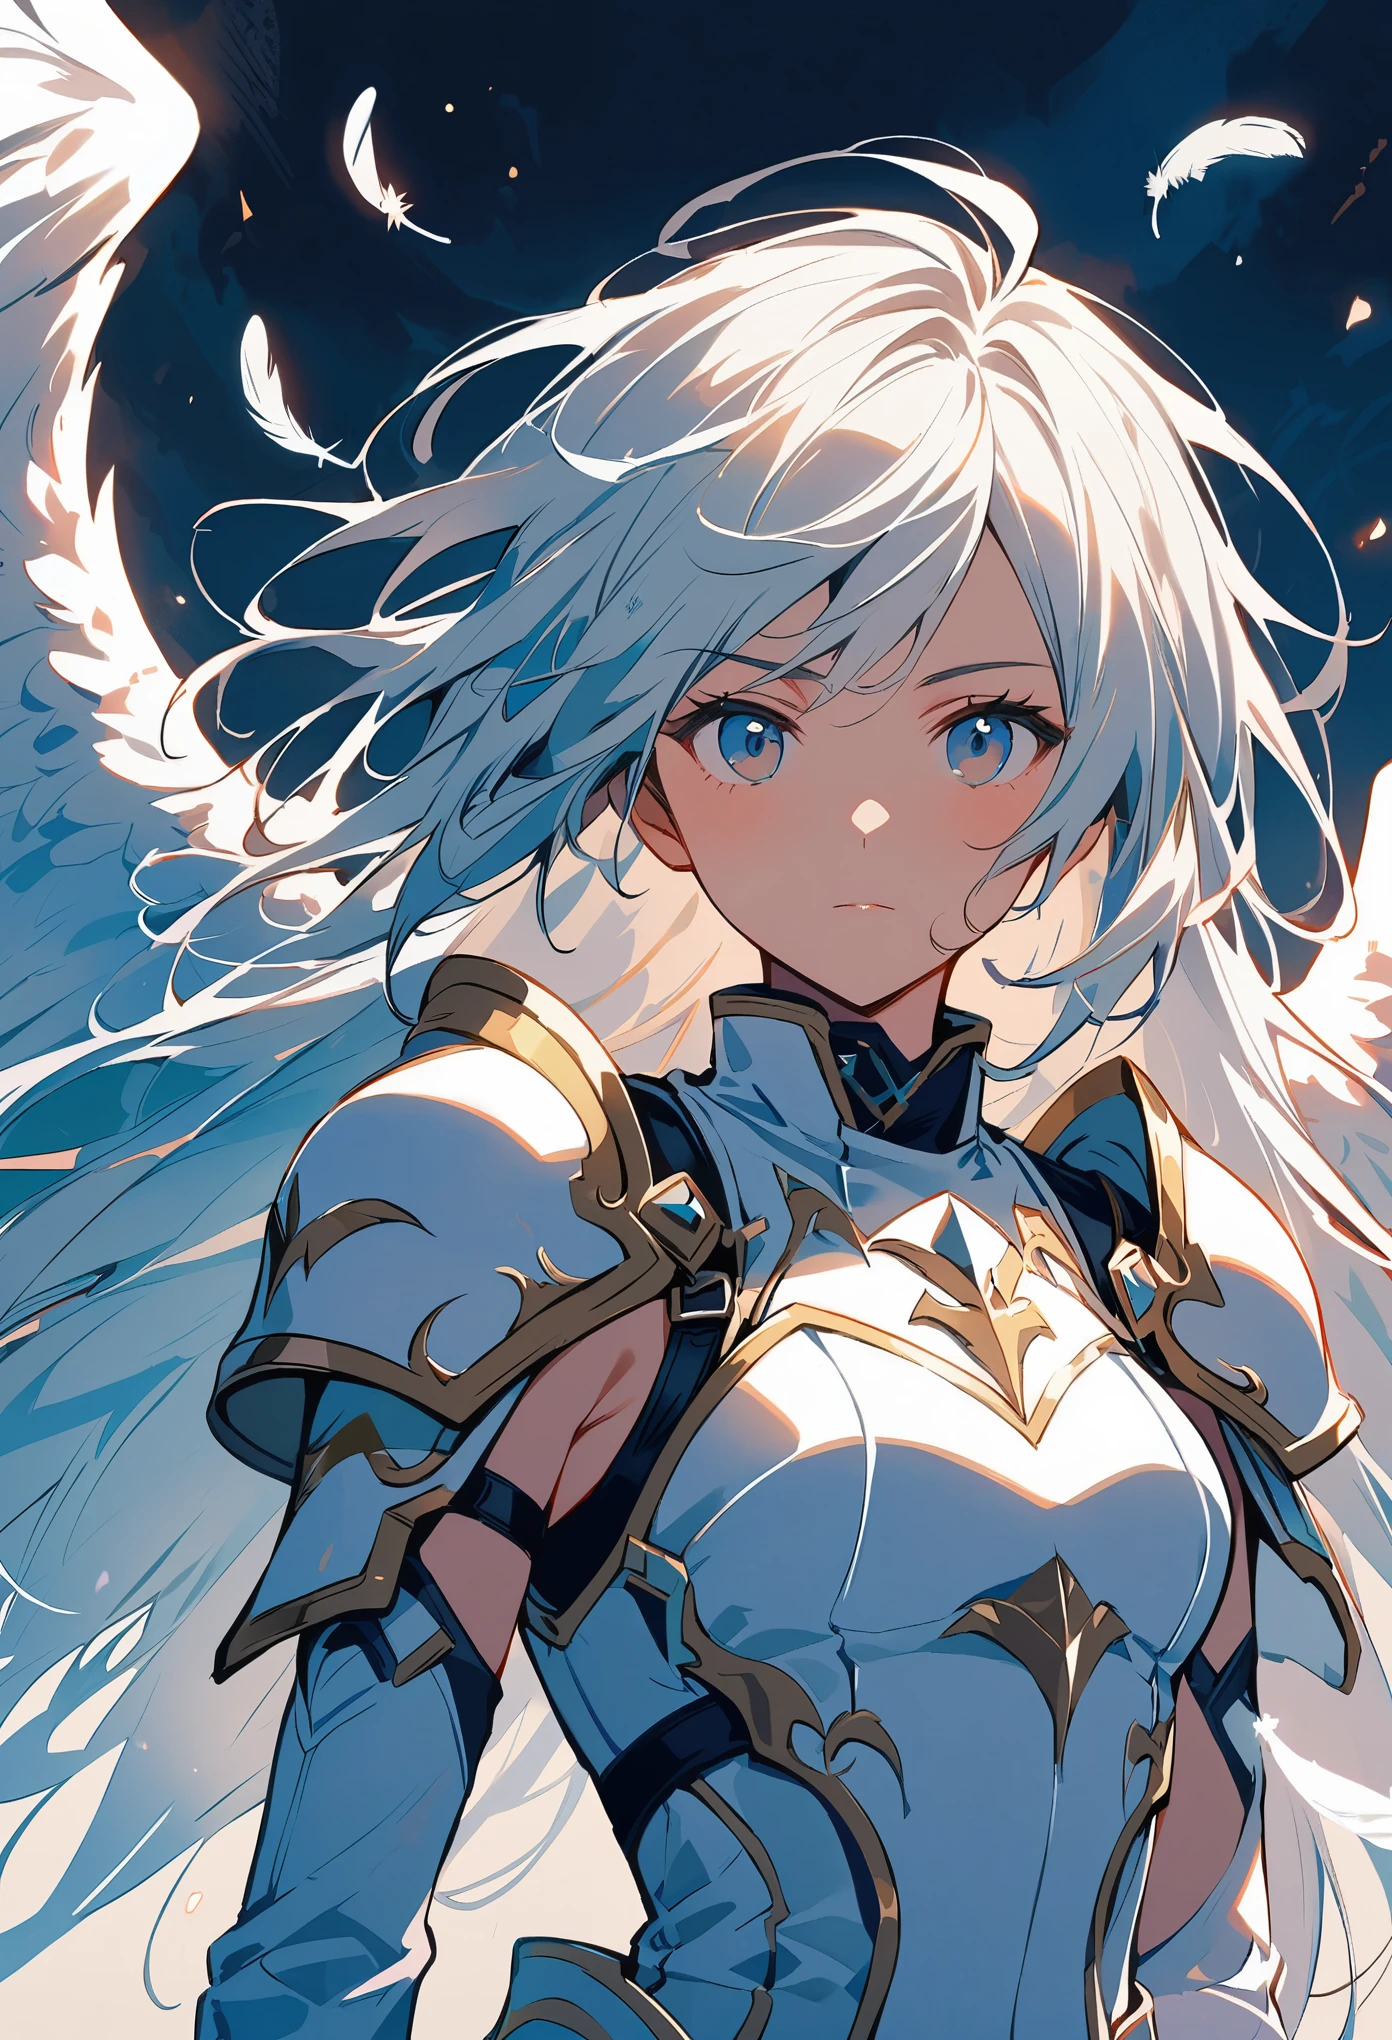 1girl angel angel_wings armor feathers_long wing feathers_hair shoulder armor shoulder_Armor single_wing solo upper part_The body is white_Theme white_wings wings